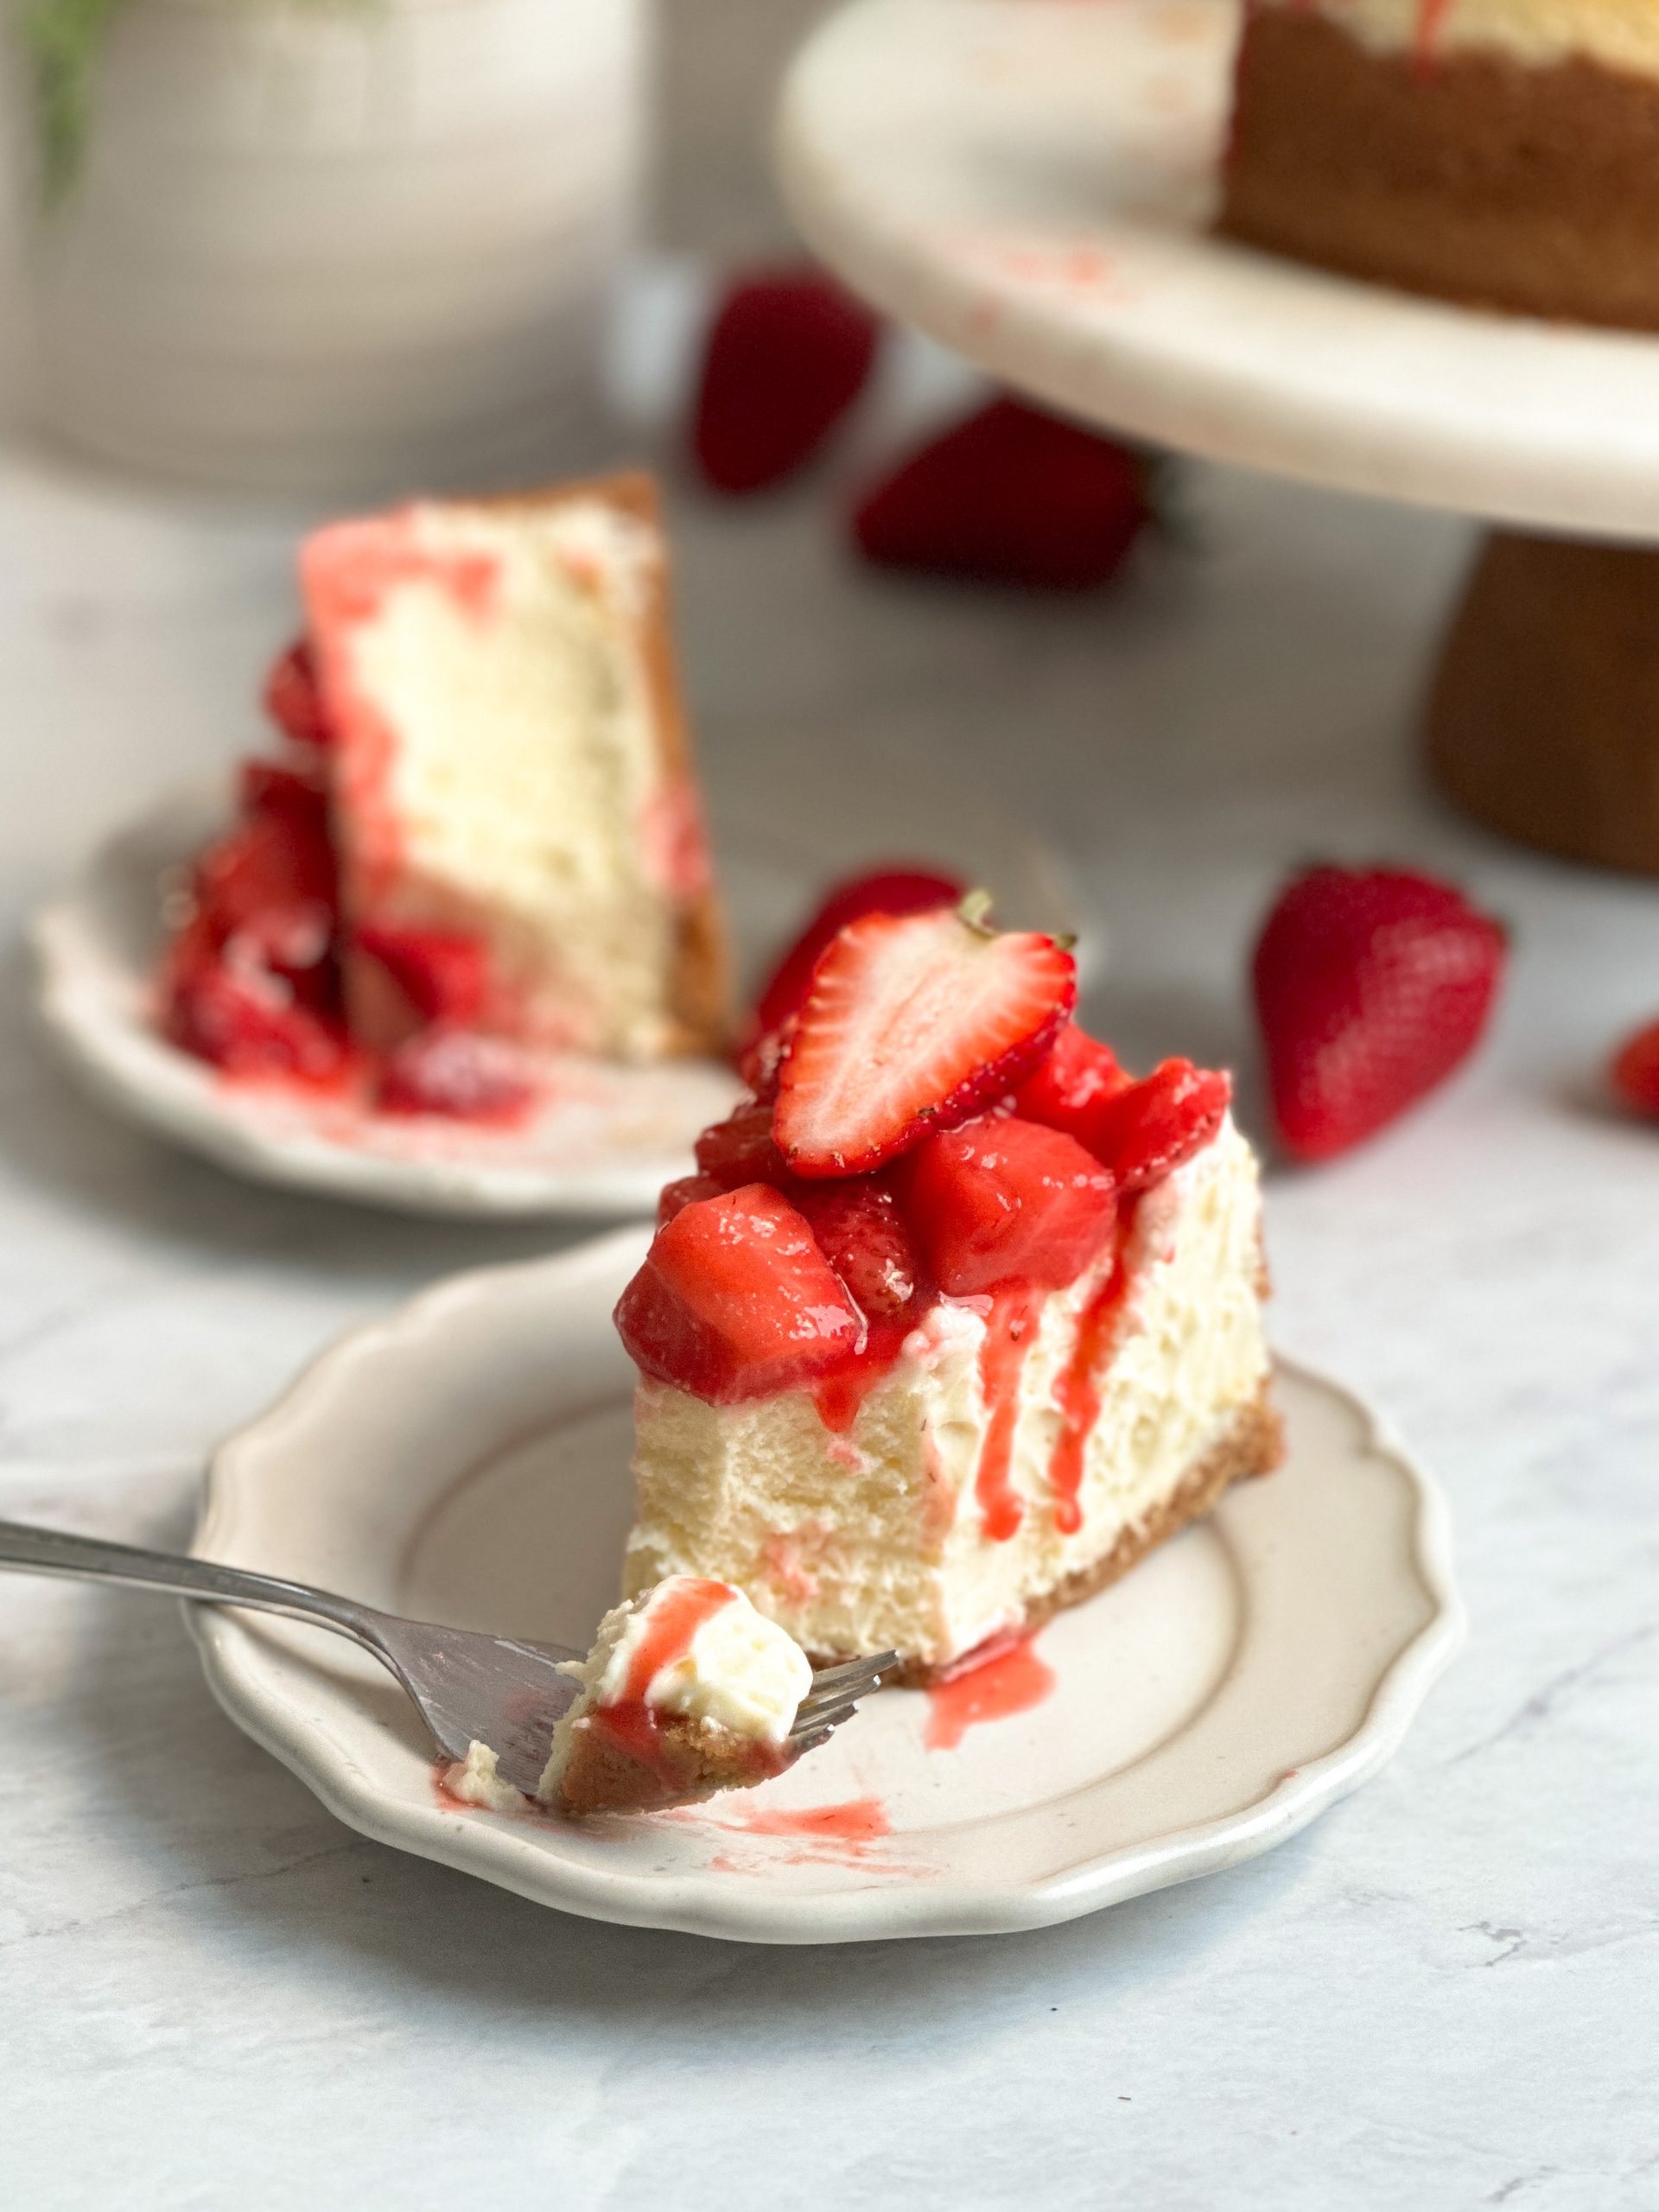 slice of cheesecake on a small plate with a fork taking a bite. cheesecake has a very creamy texture and is covered with a saucy strawberry compote